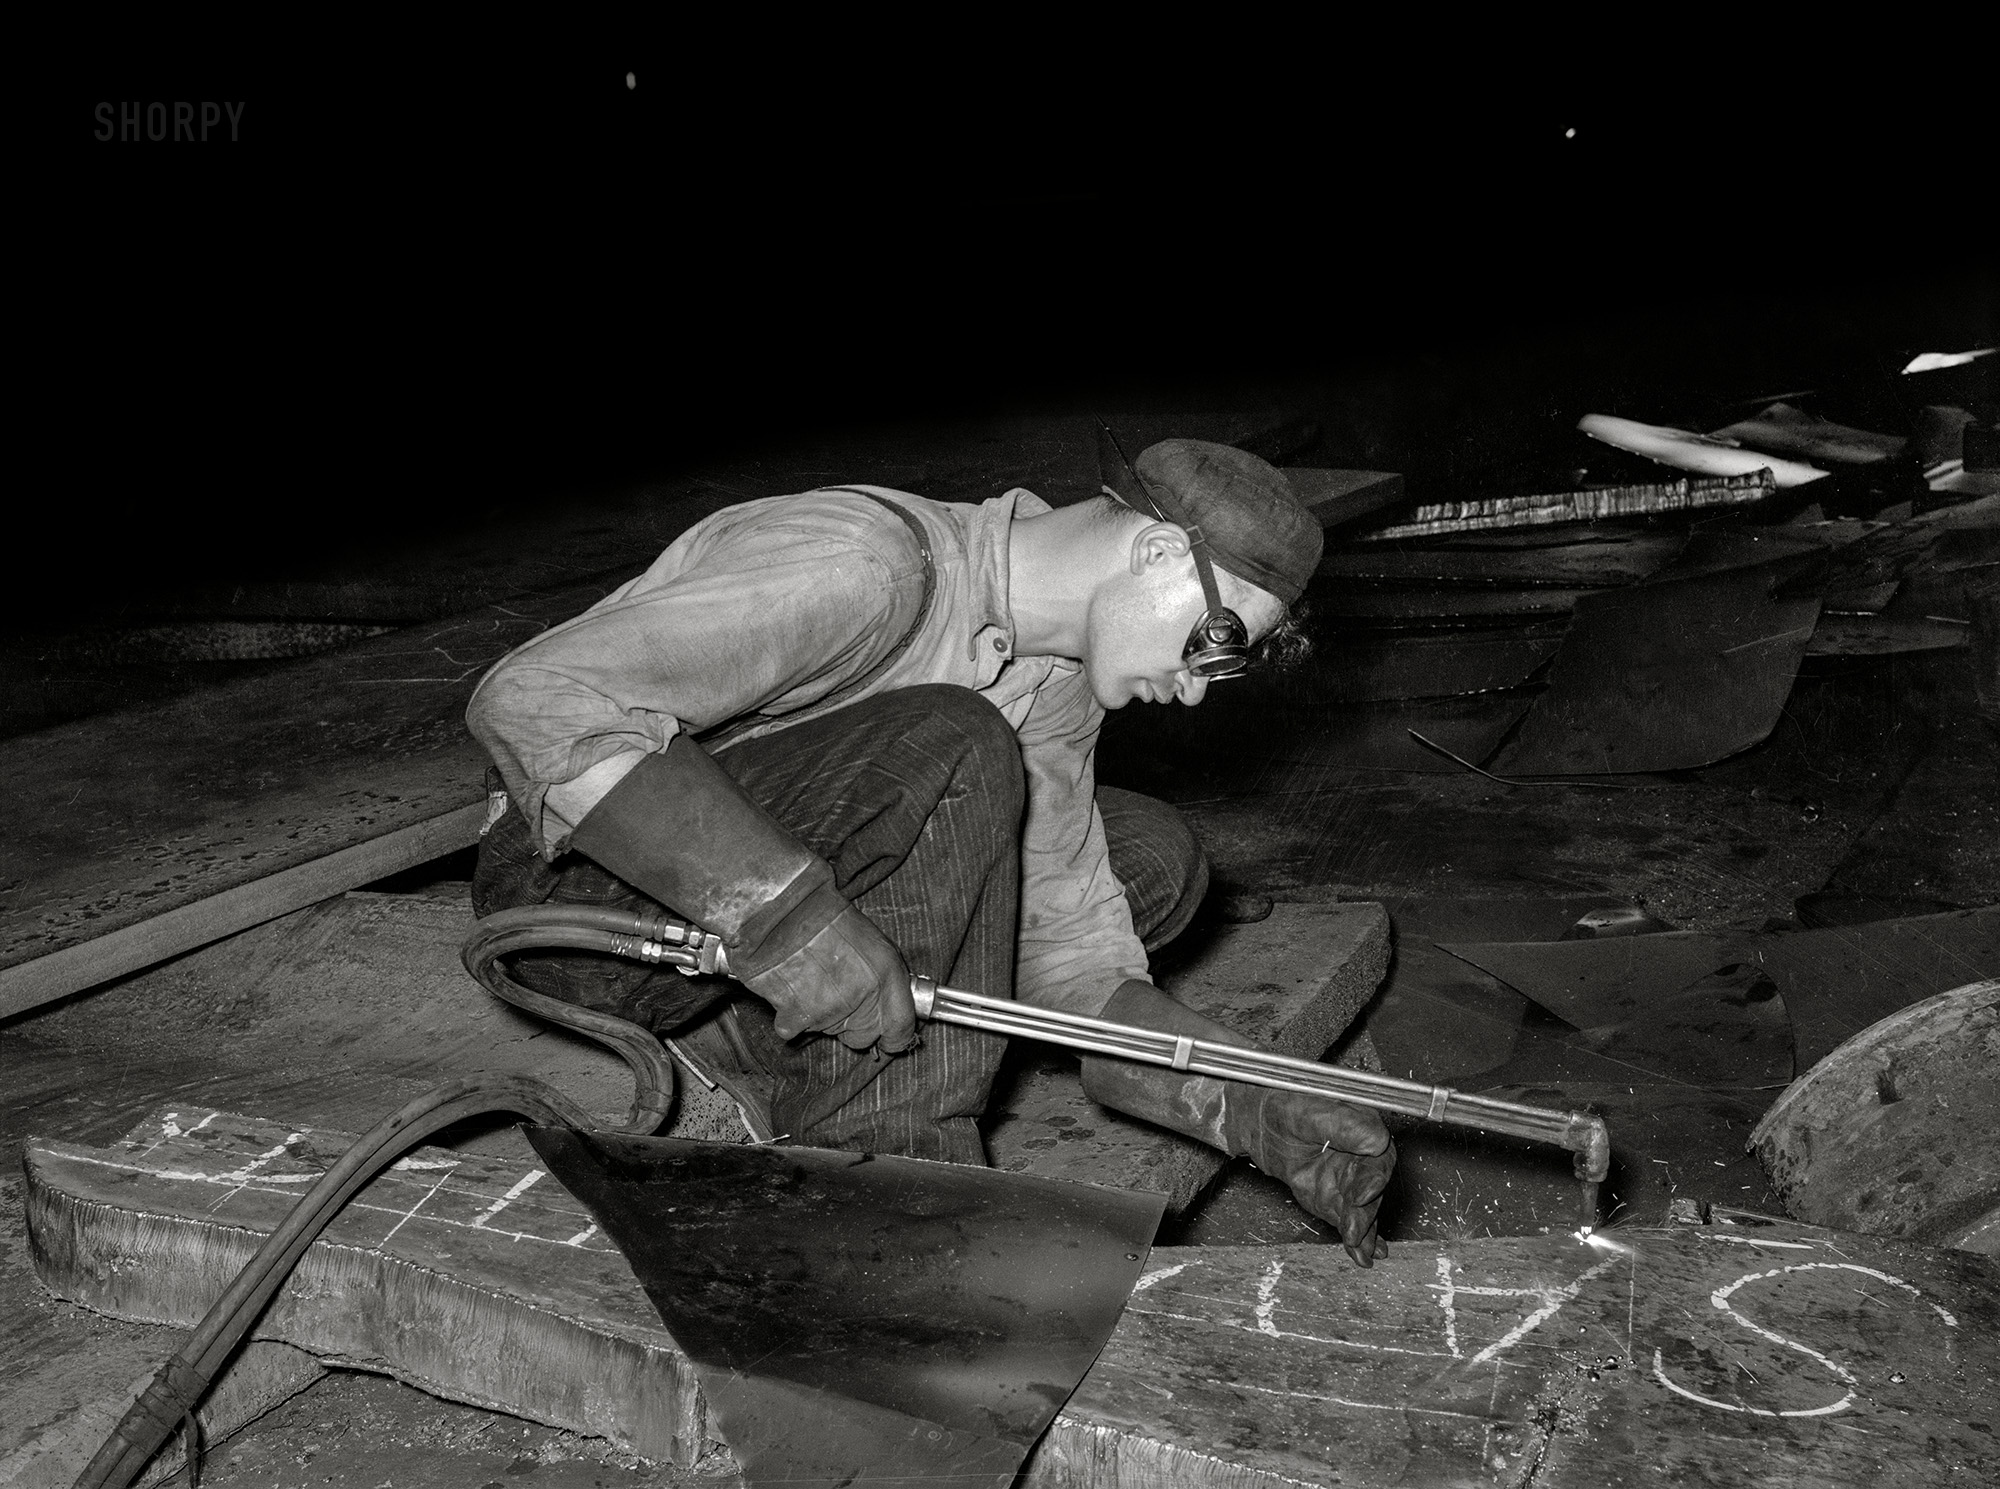 &nbsp; &nbsp; &nbsp; &nbsp; A Shorpy salute to the nation's workers on Labor Day 2020 --
July 1938. "Steel worker at rolling mill. Pittsburgh, Pennsylvania." Medium format acetate negative by Arthur Rothstein for the Farm Security Administration. View full size.